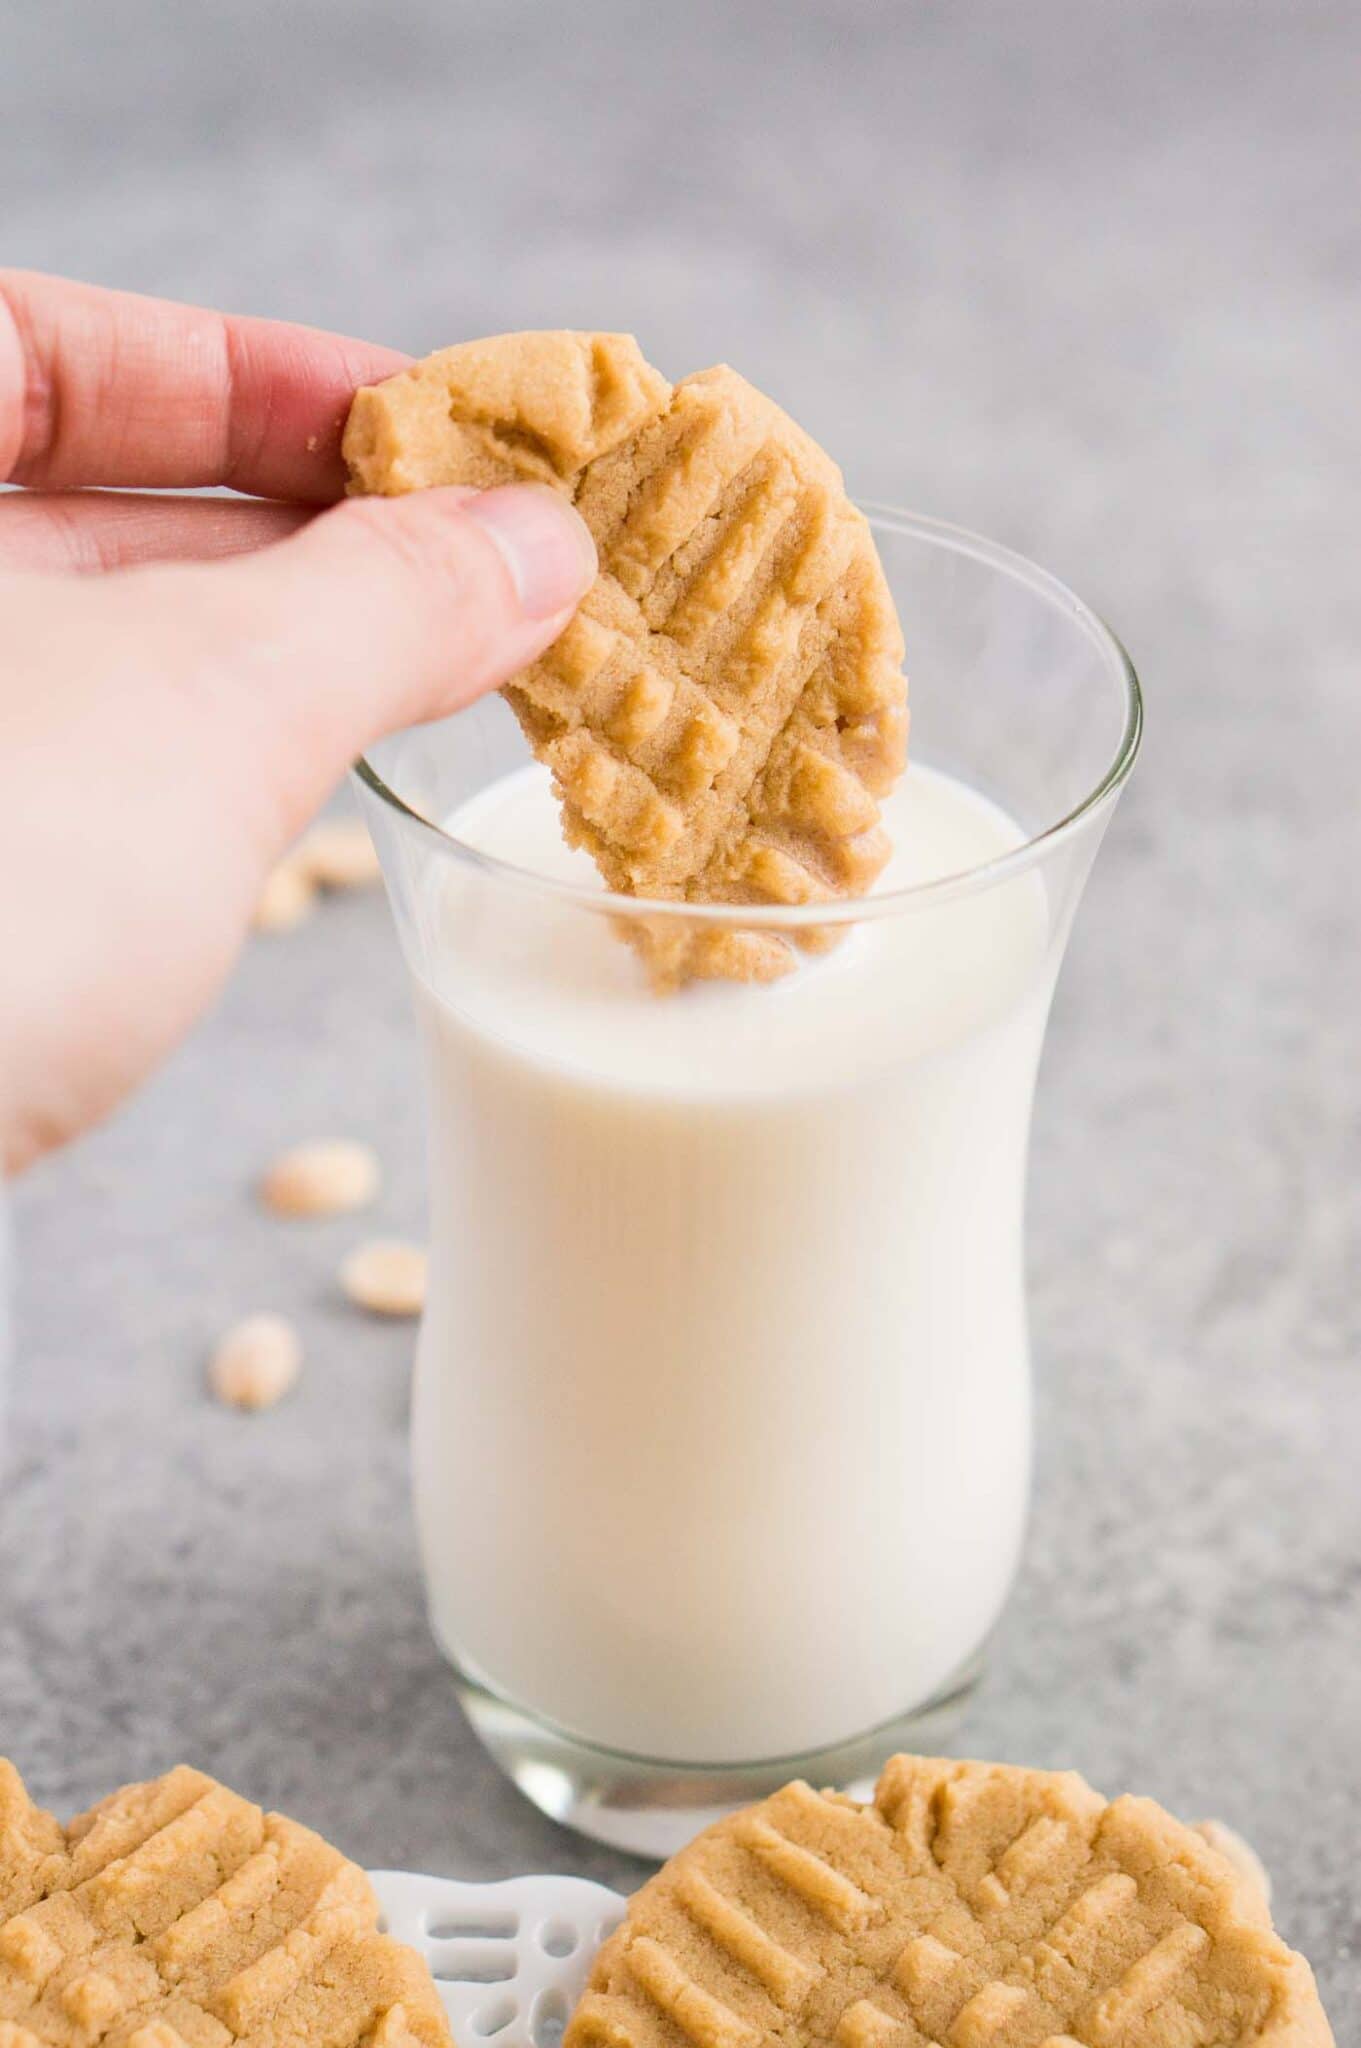 dipping peanut butter cookie in a glass of milk